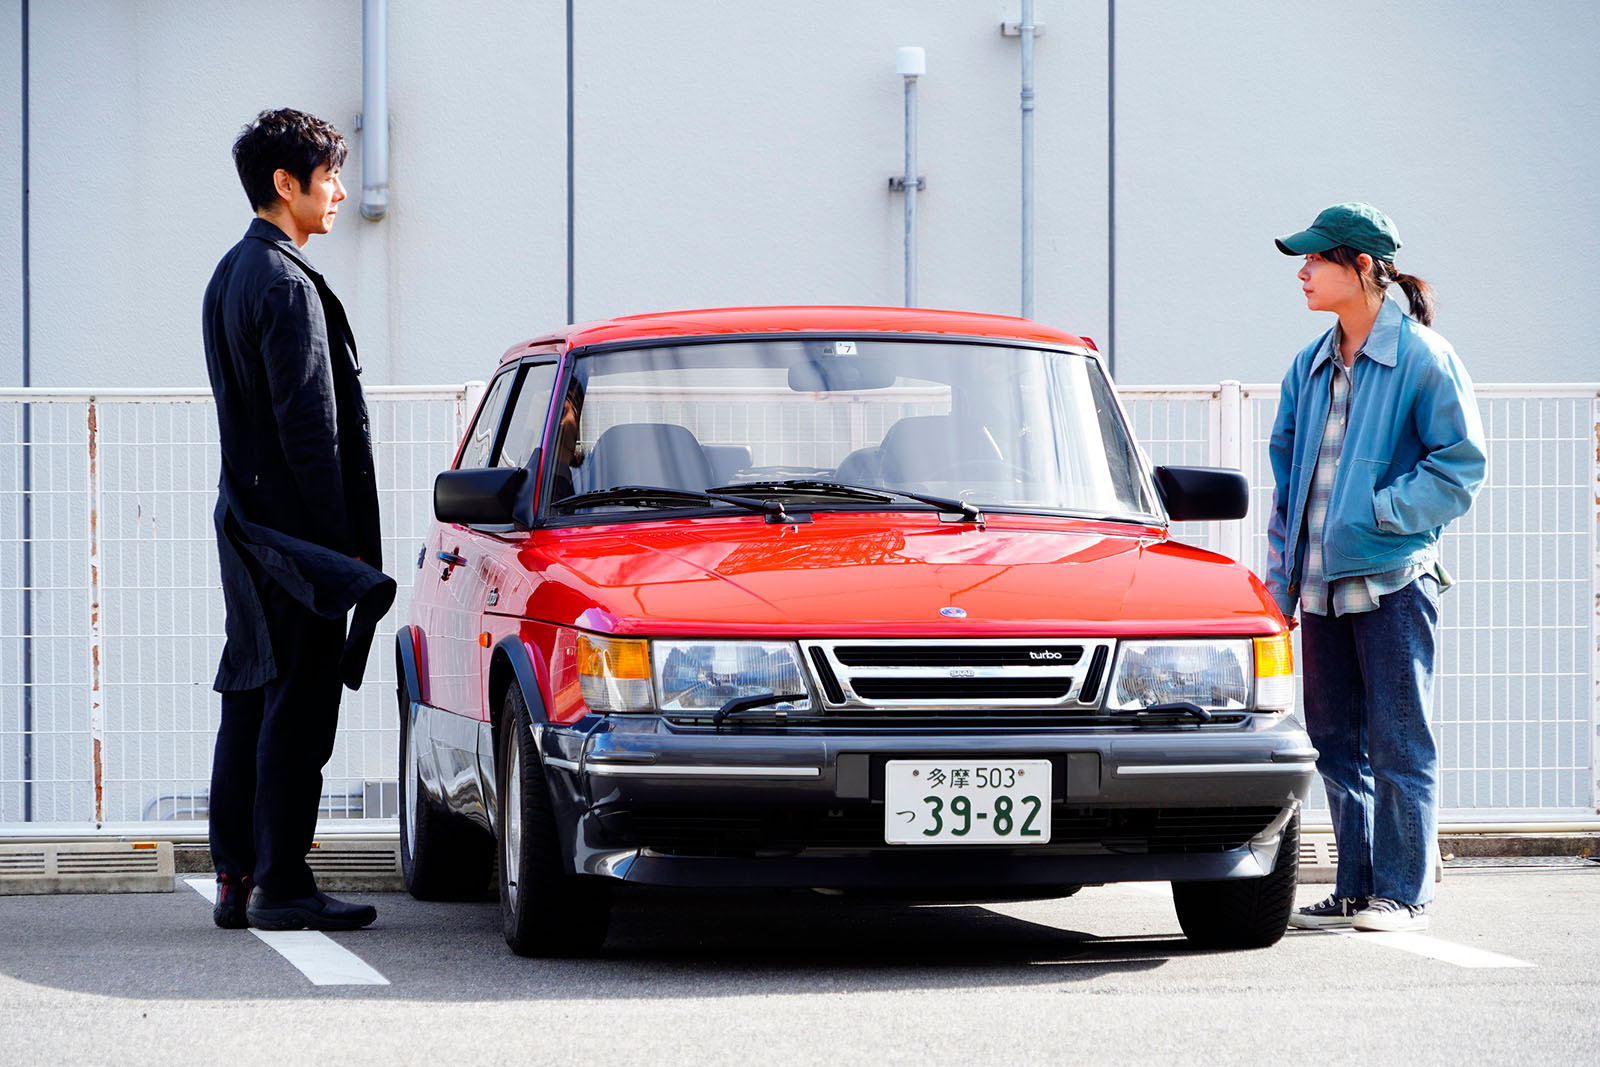 Hidetoshi Nishijima (L) plays opposite Toko Miura (R) in Drive My Car. Image © Bitters End